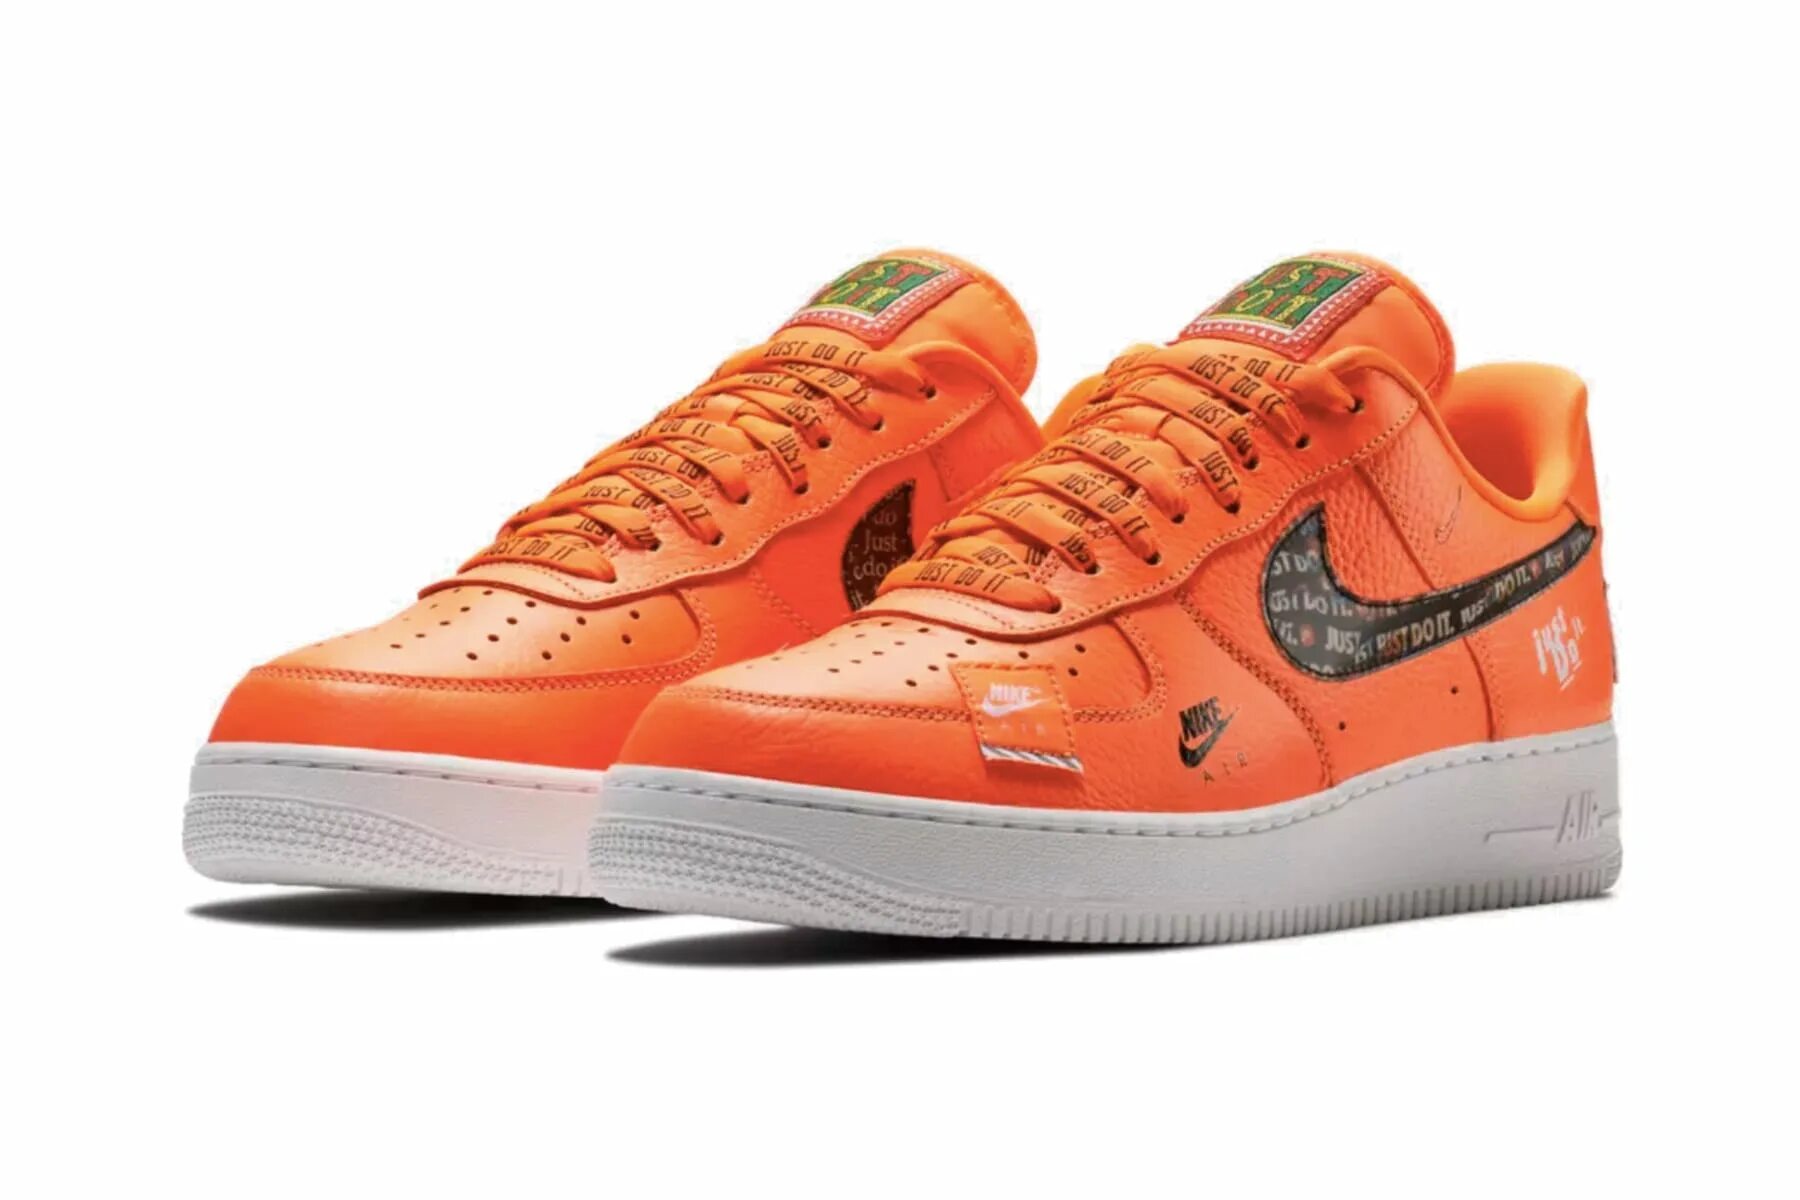 Force first force. Nike Air Force 1 07 PRM JDI. Найк АИР Форс 1 just do it. Nike Air Air Force 1. Nike Air Force 1 Low.